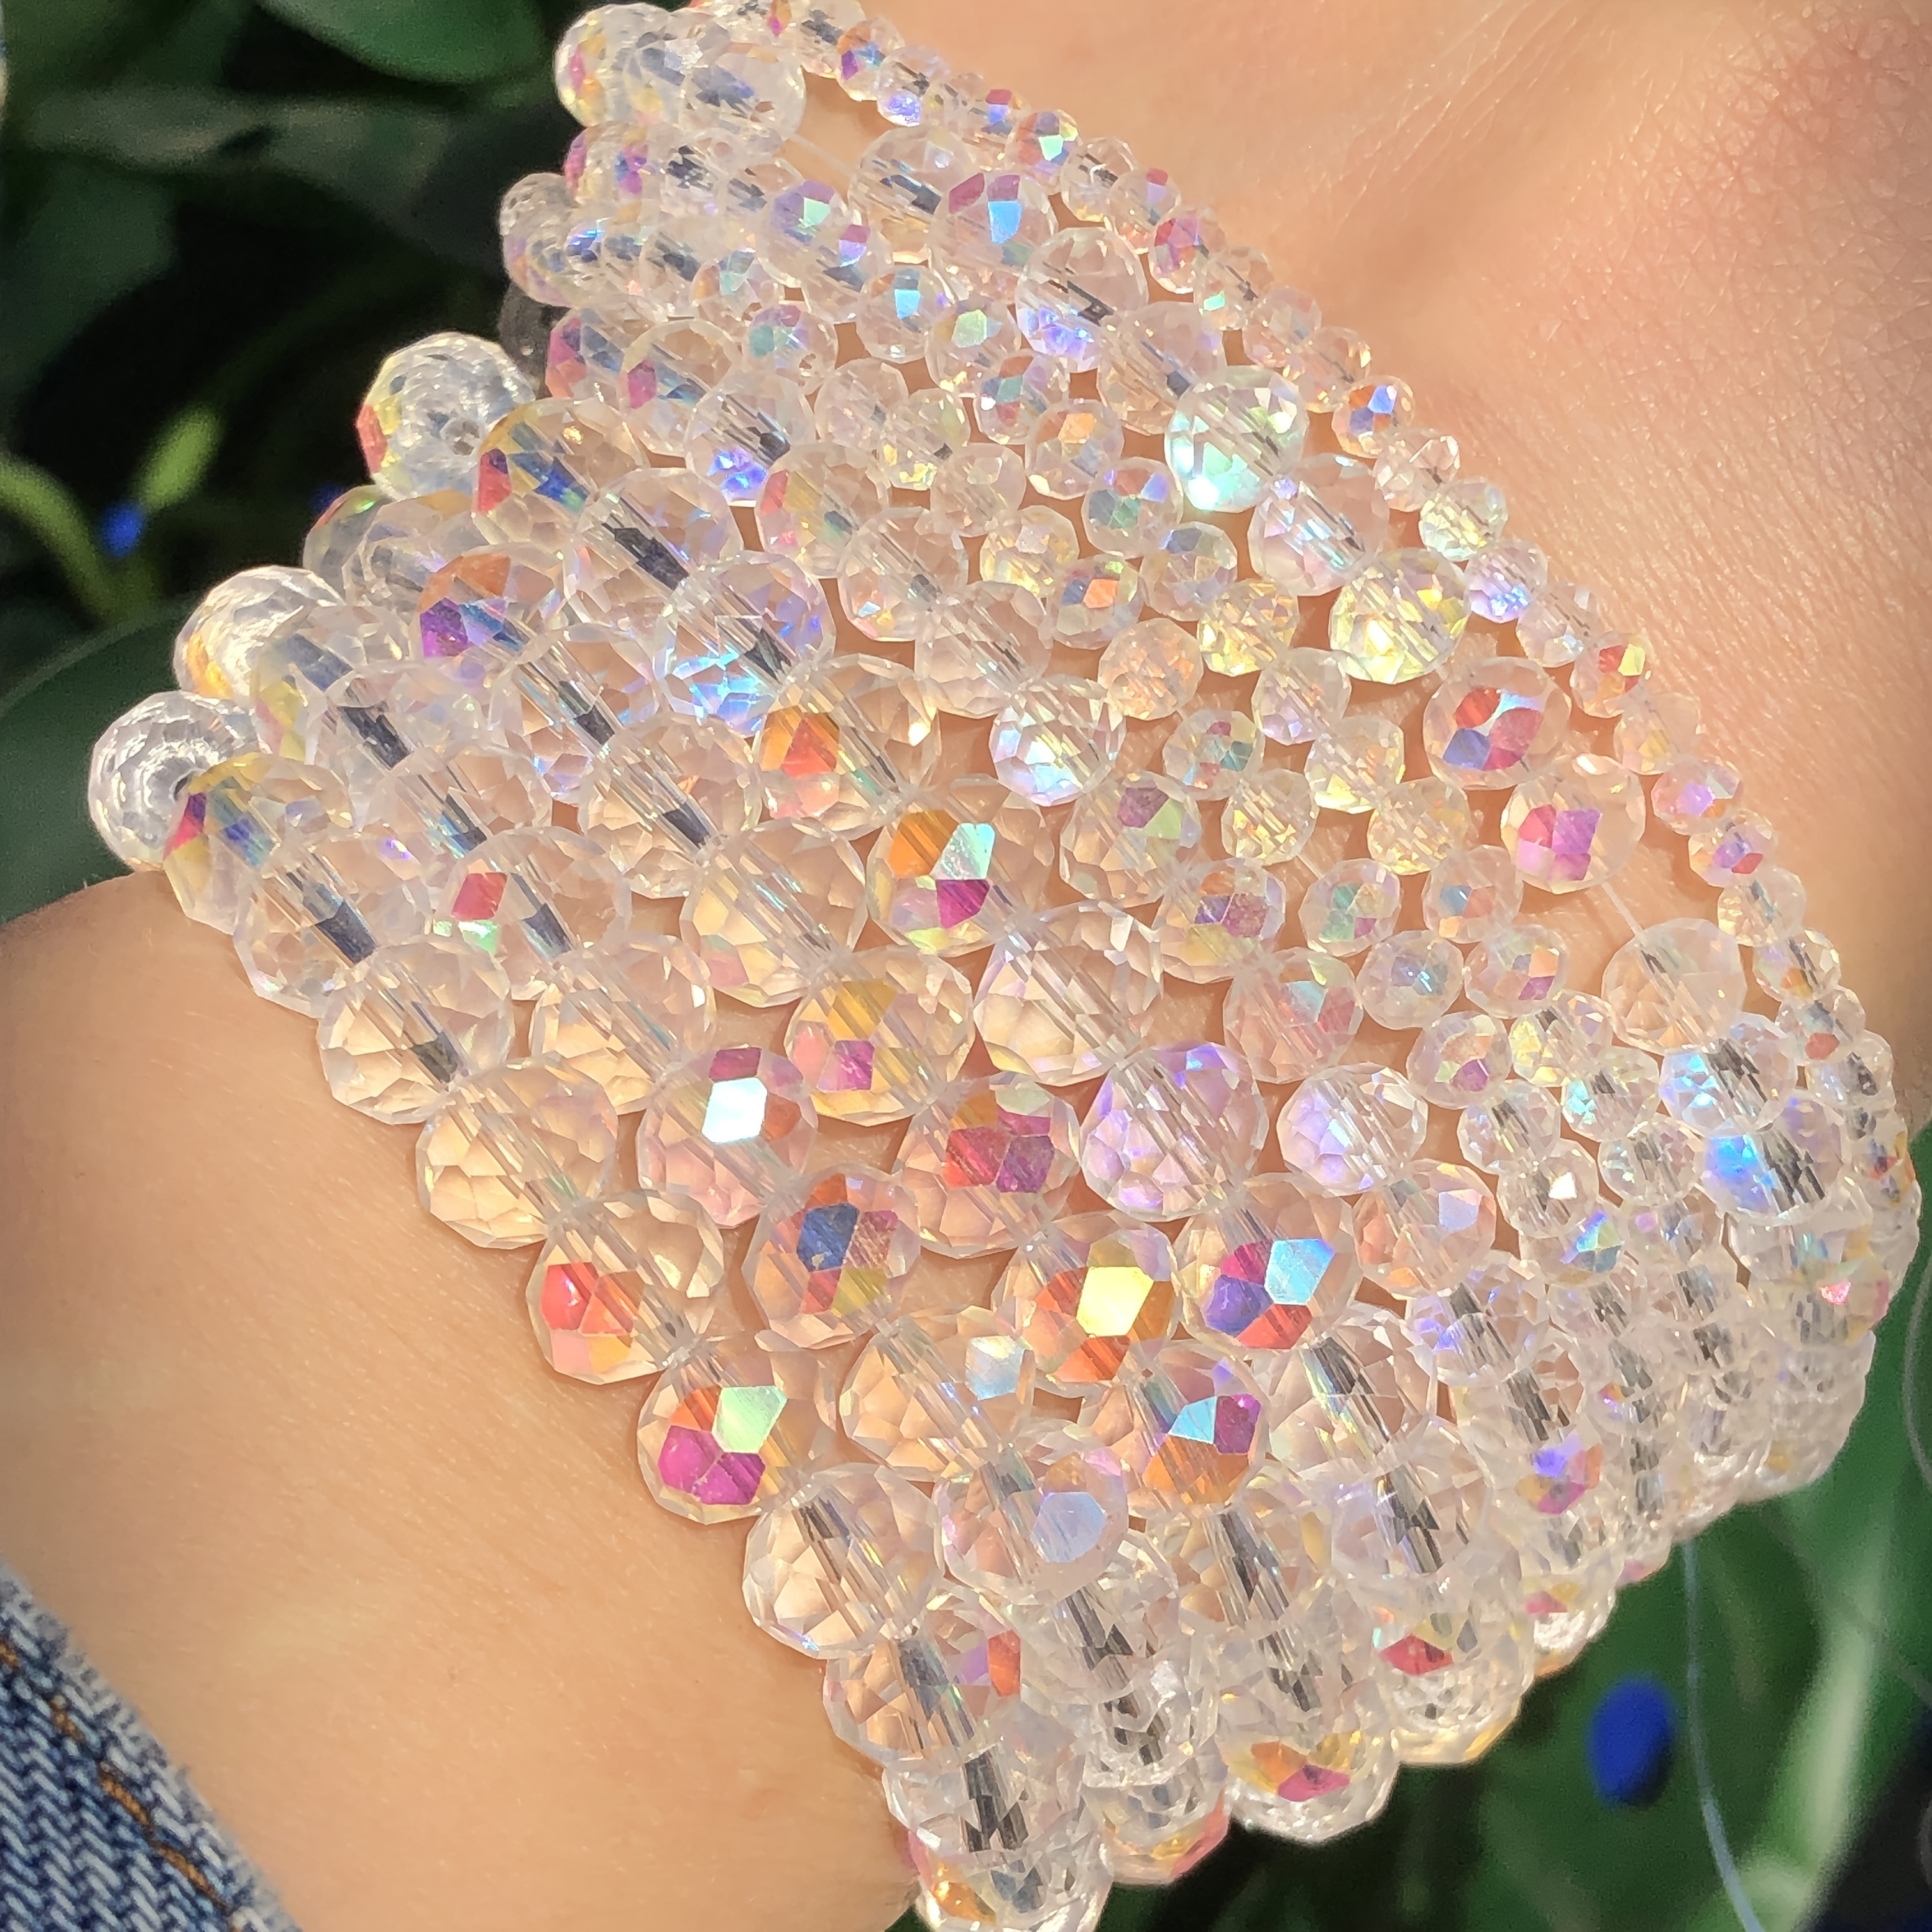 4/6/8/10/12/14/16mm Faceted Czech Crystal Acrylic Clear Beads Solid Color  Loose Spacer Beads for Diy Jewelry Making Accessories - AliExpress